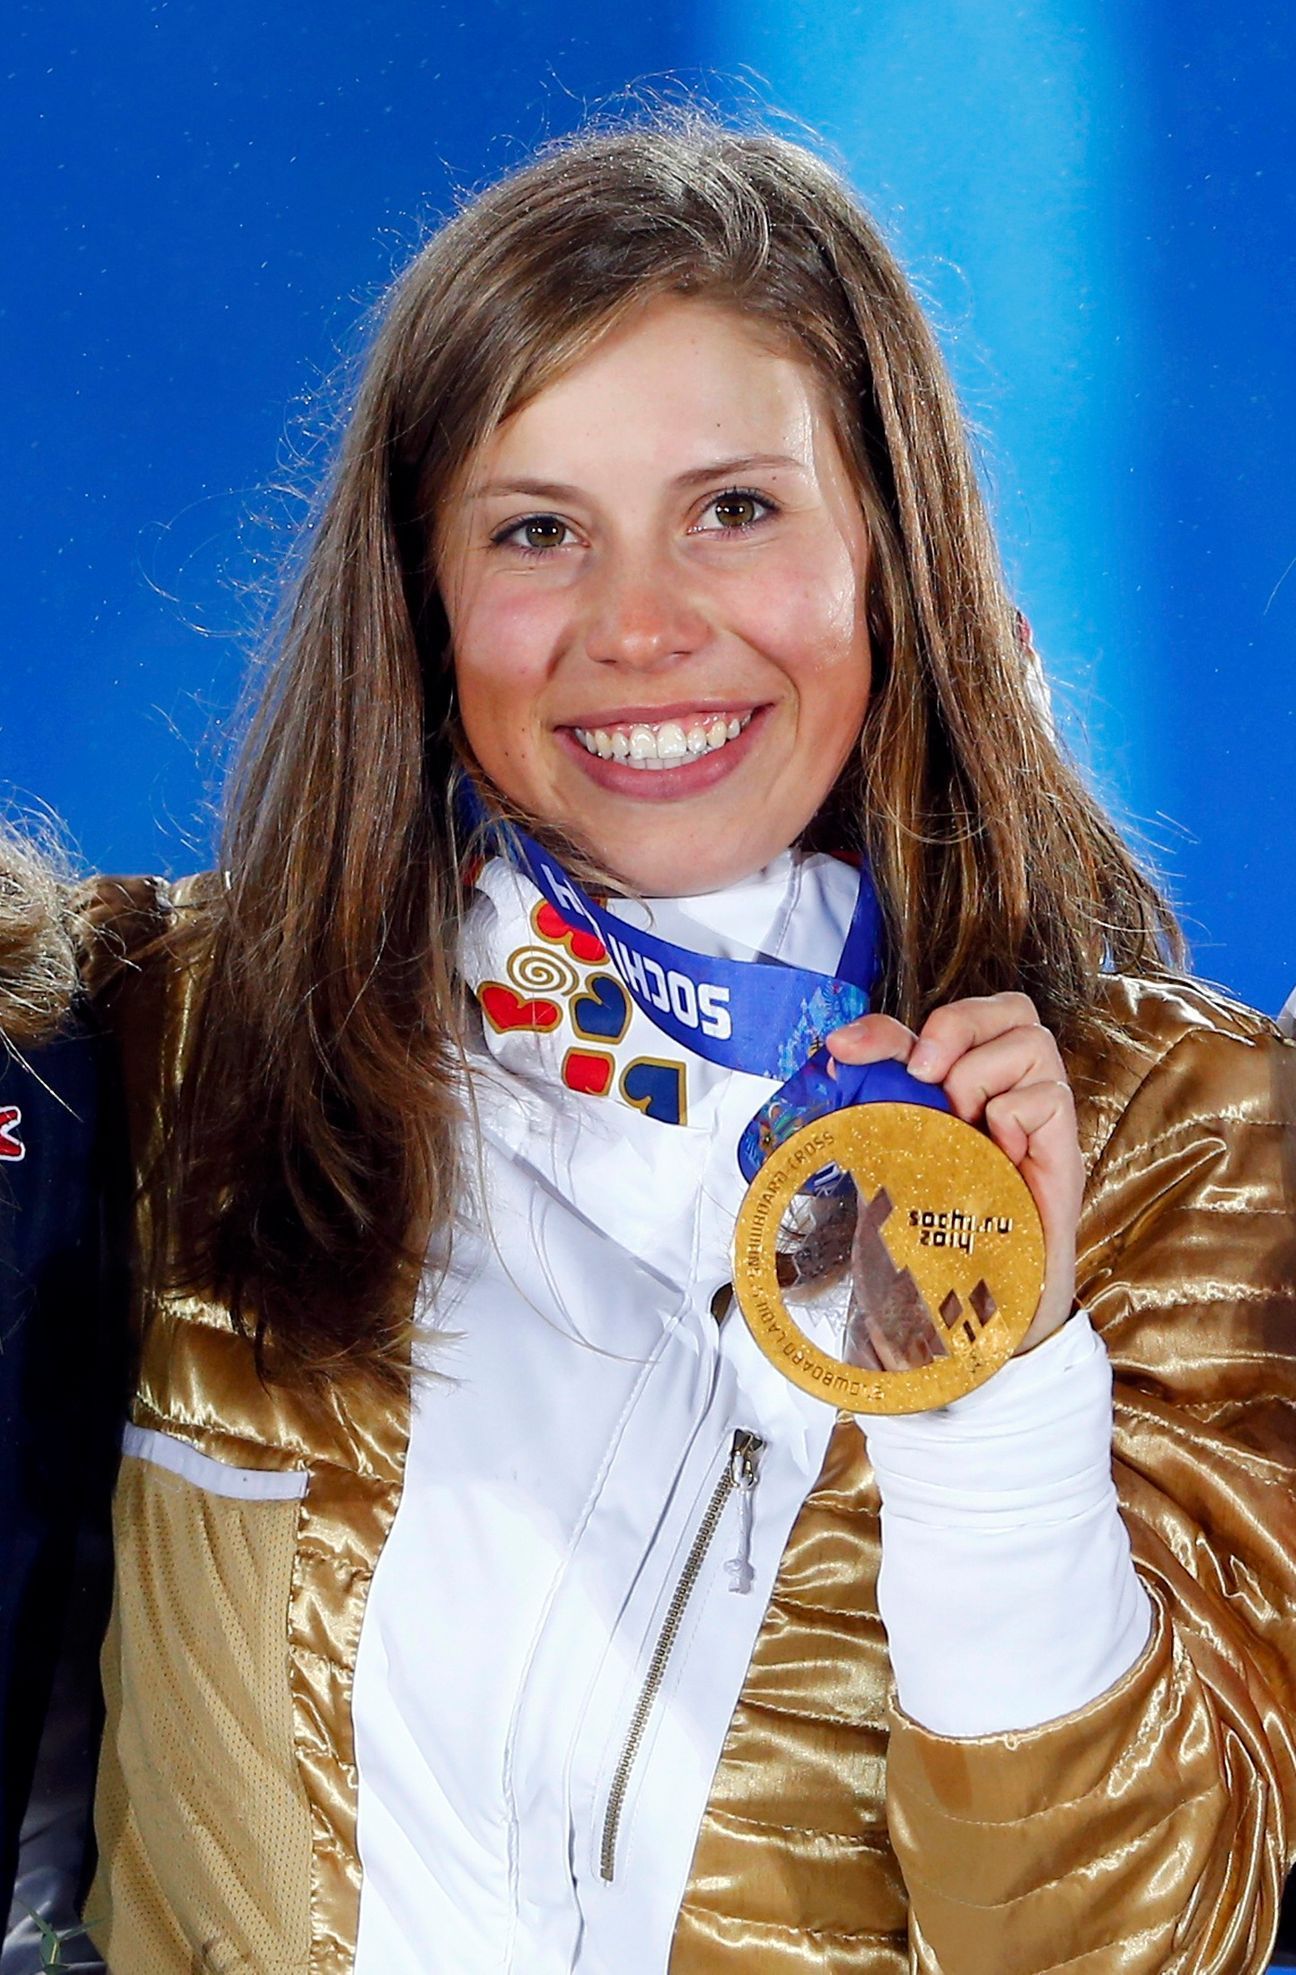 Gold medallist Eva Samkova of the Czech Republic poses during the victory ceremony for the women's snowboard cross competition at the 2014 Sochi Winter Olympics